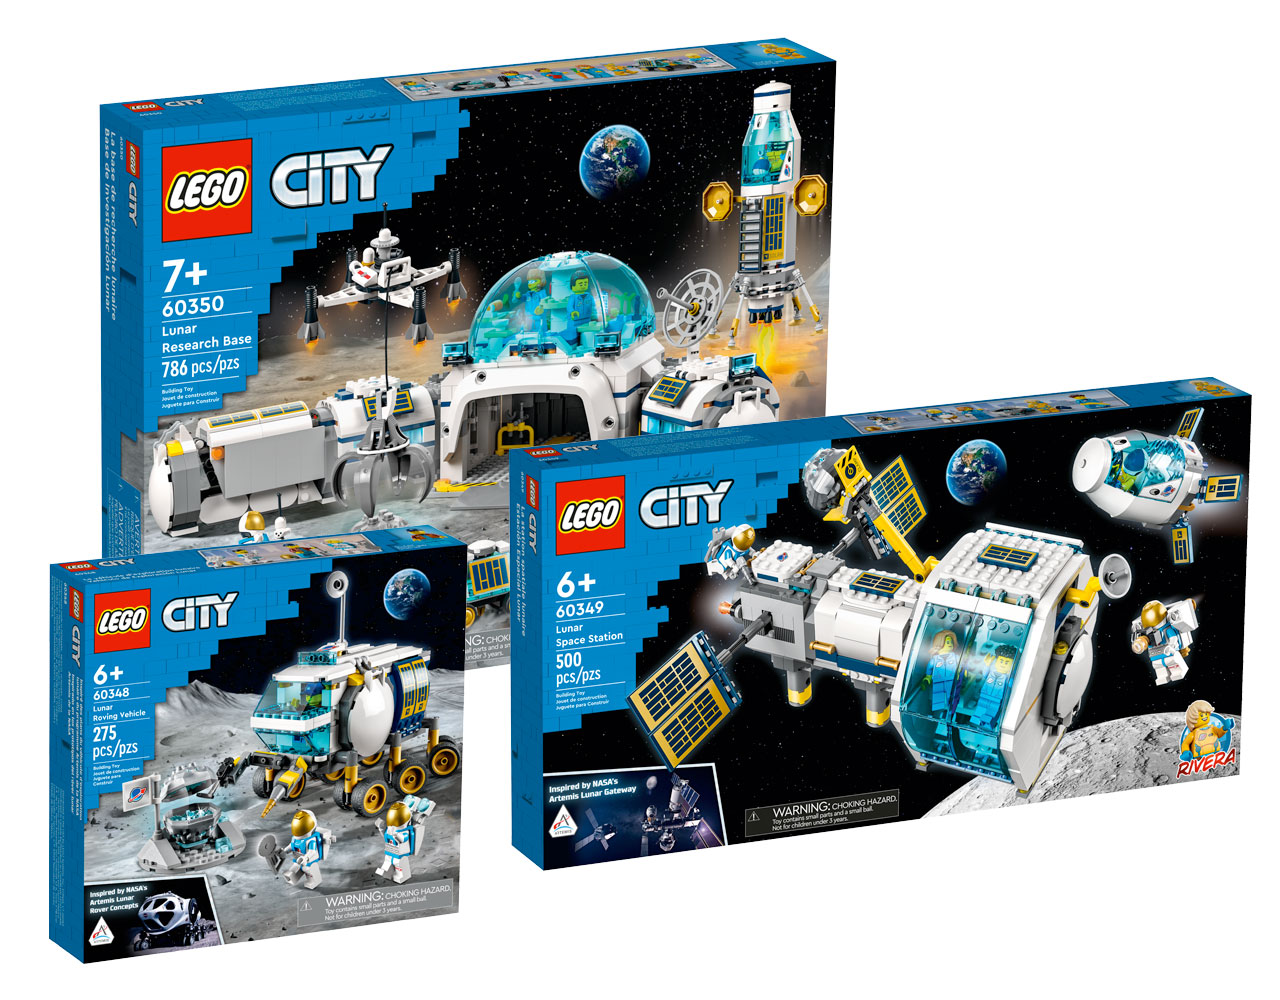 LEGO rolls out Artemis toy sets ahead of new NASA missions | collectSPACE